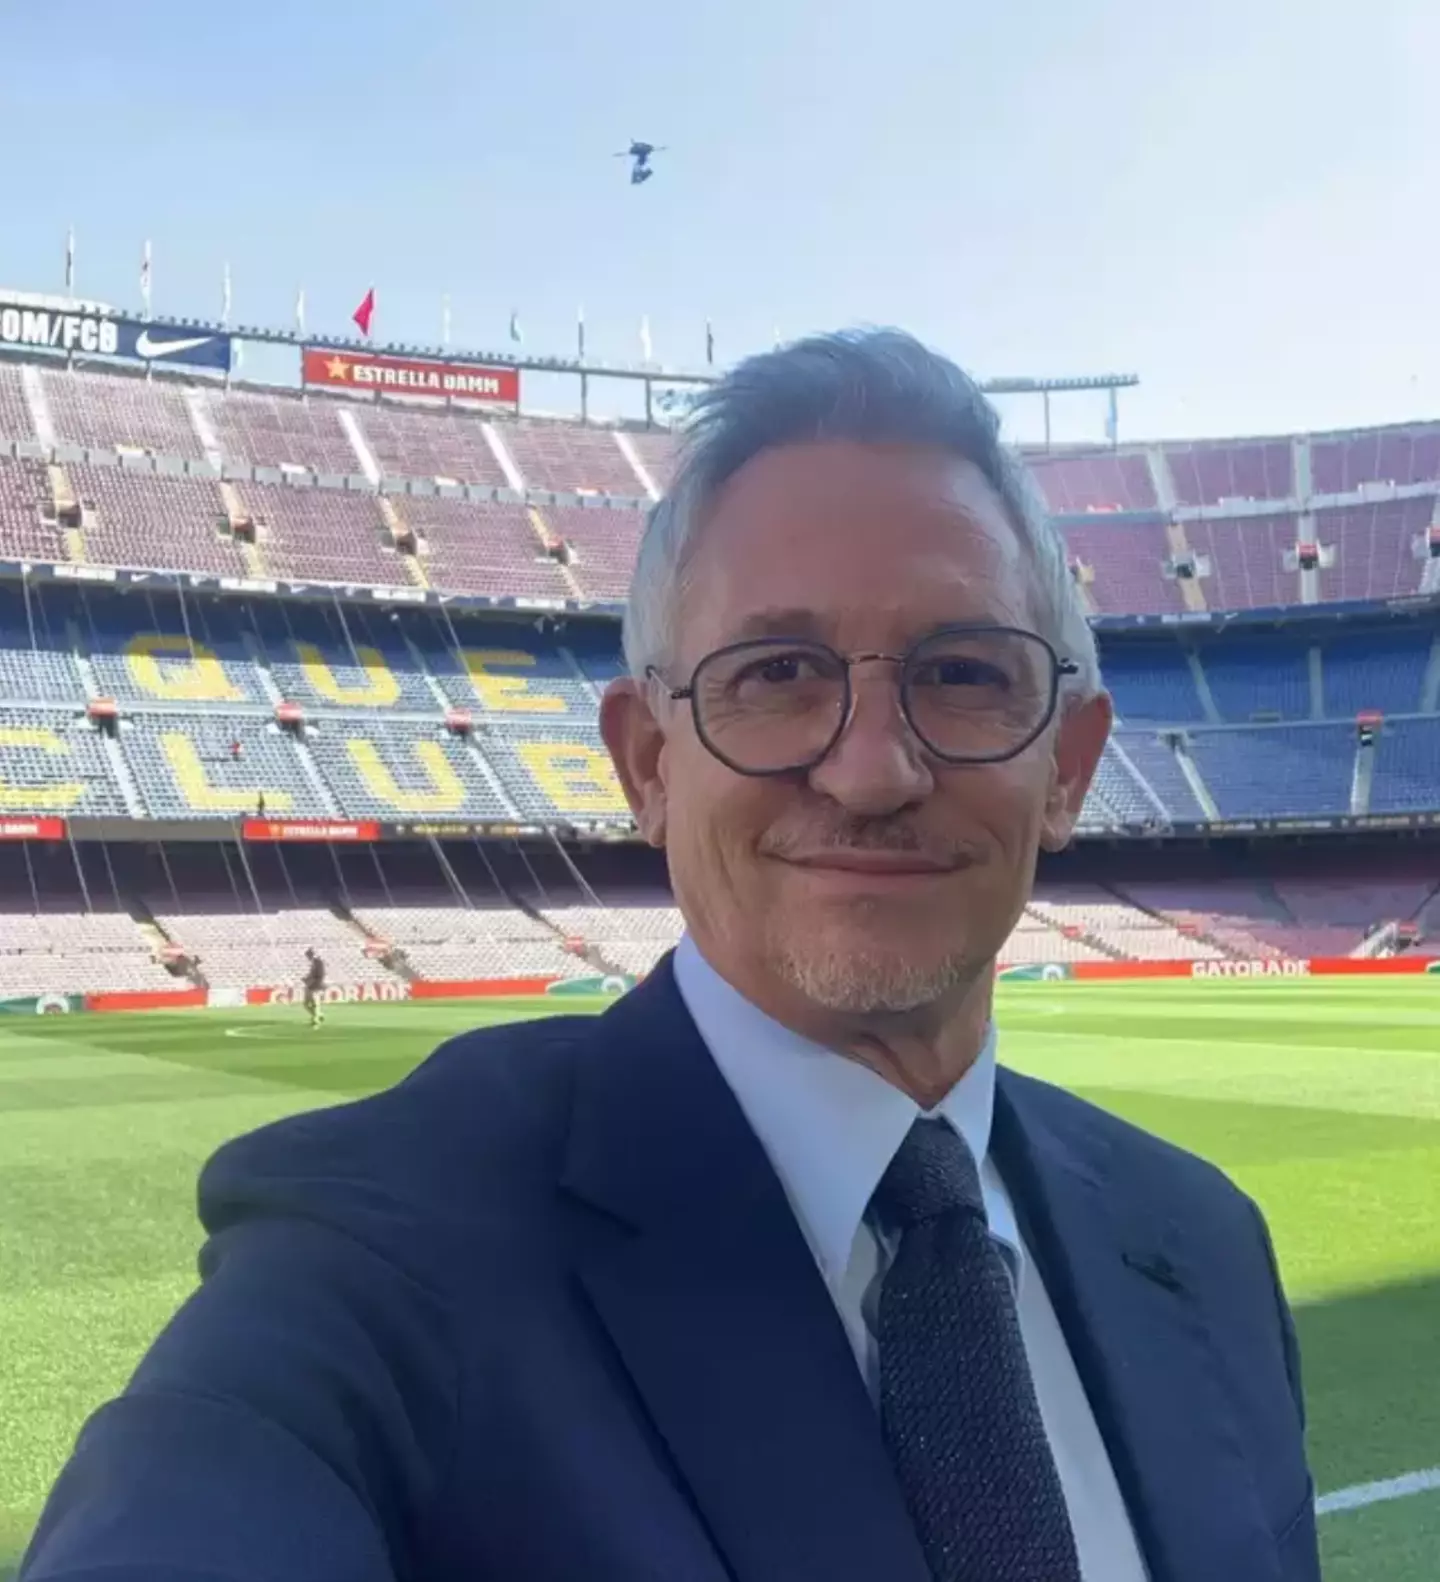 The BBC has been slammed for dropping Lineker after he criticised the UK government.